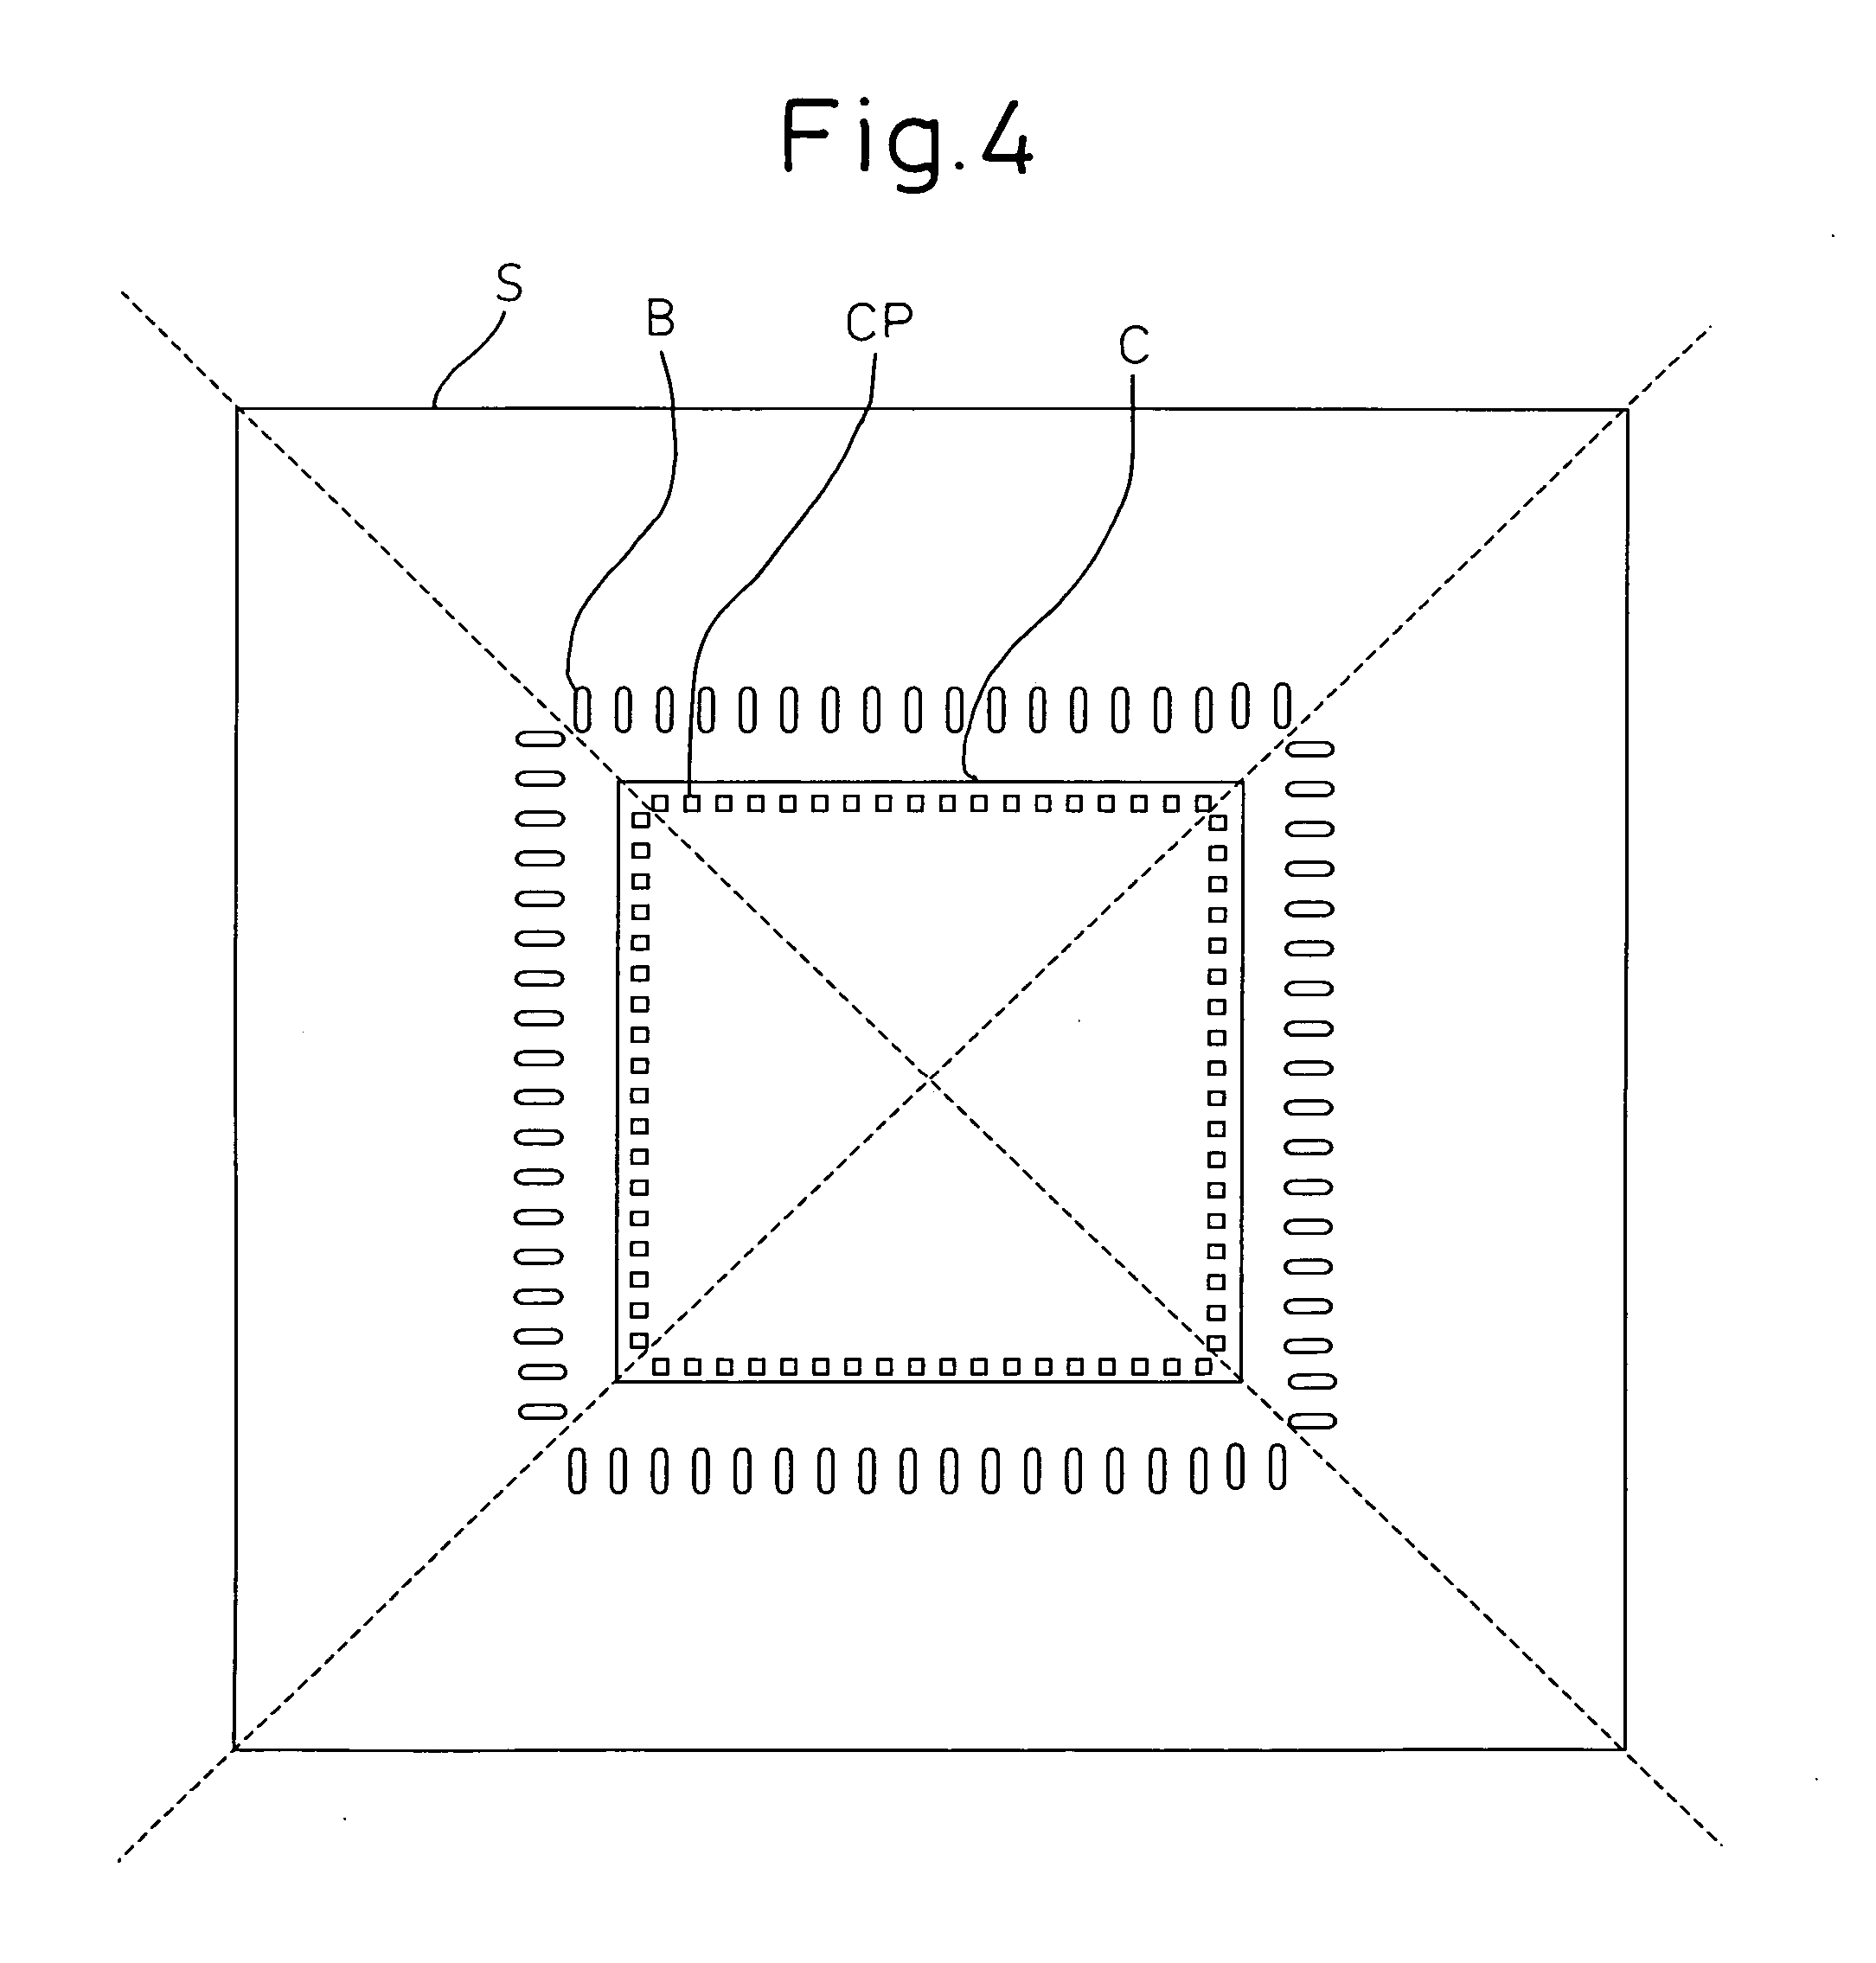 Automatic trace determination method and apparatus for automatically determining optimal trace positions on substrate using computation